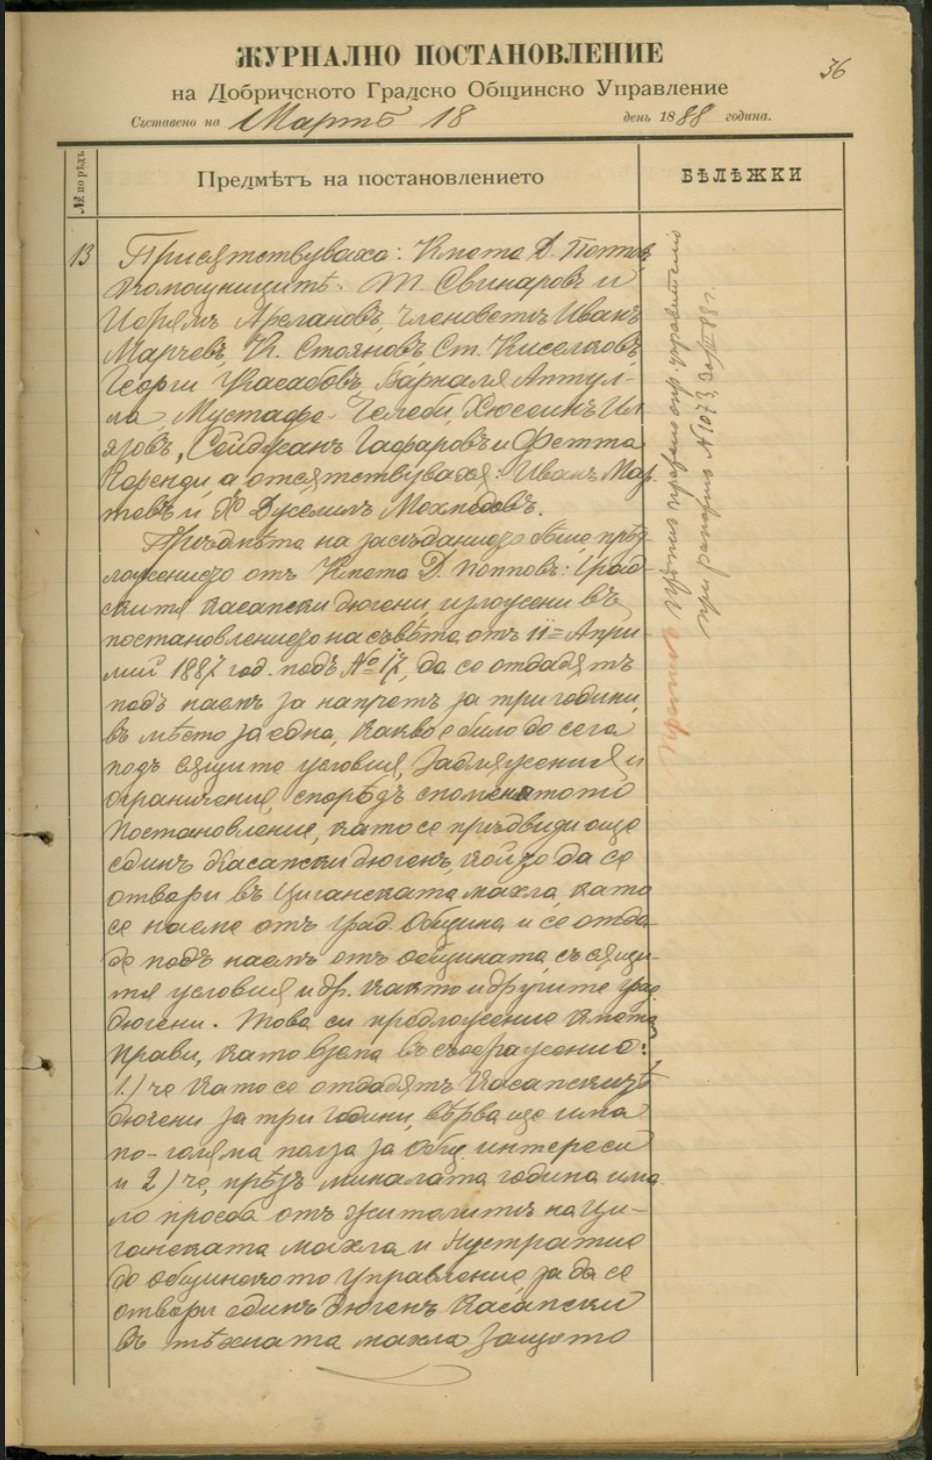 Dobrich State Archives, Minutes of the meeting of the City Municipal Administration of  Dobrich (18 March 1888), available here
